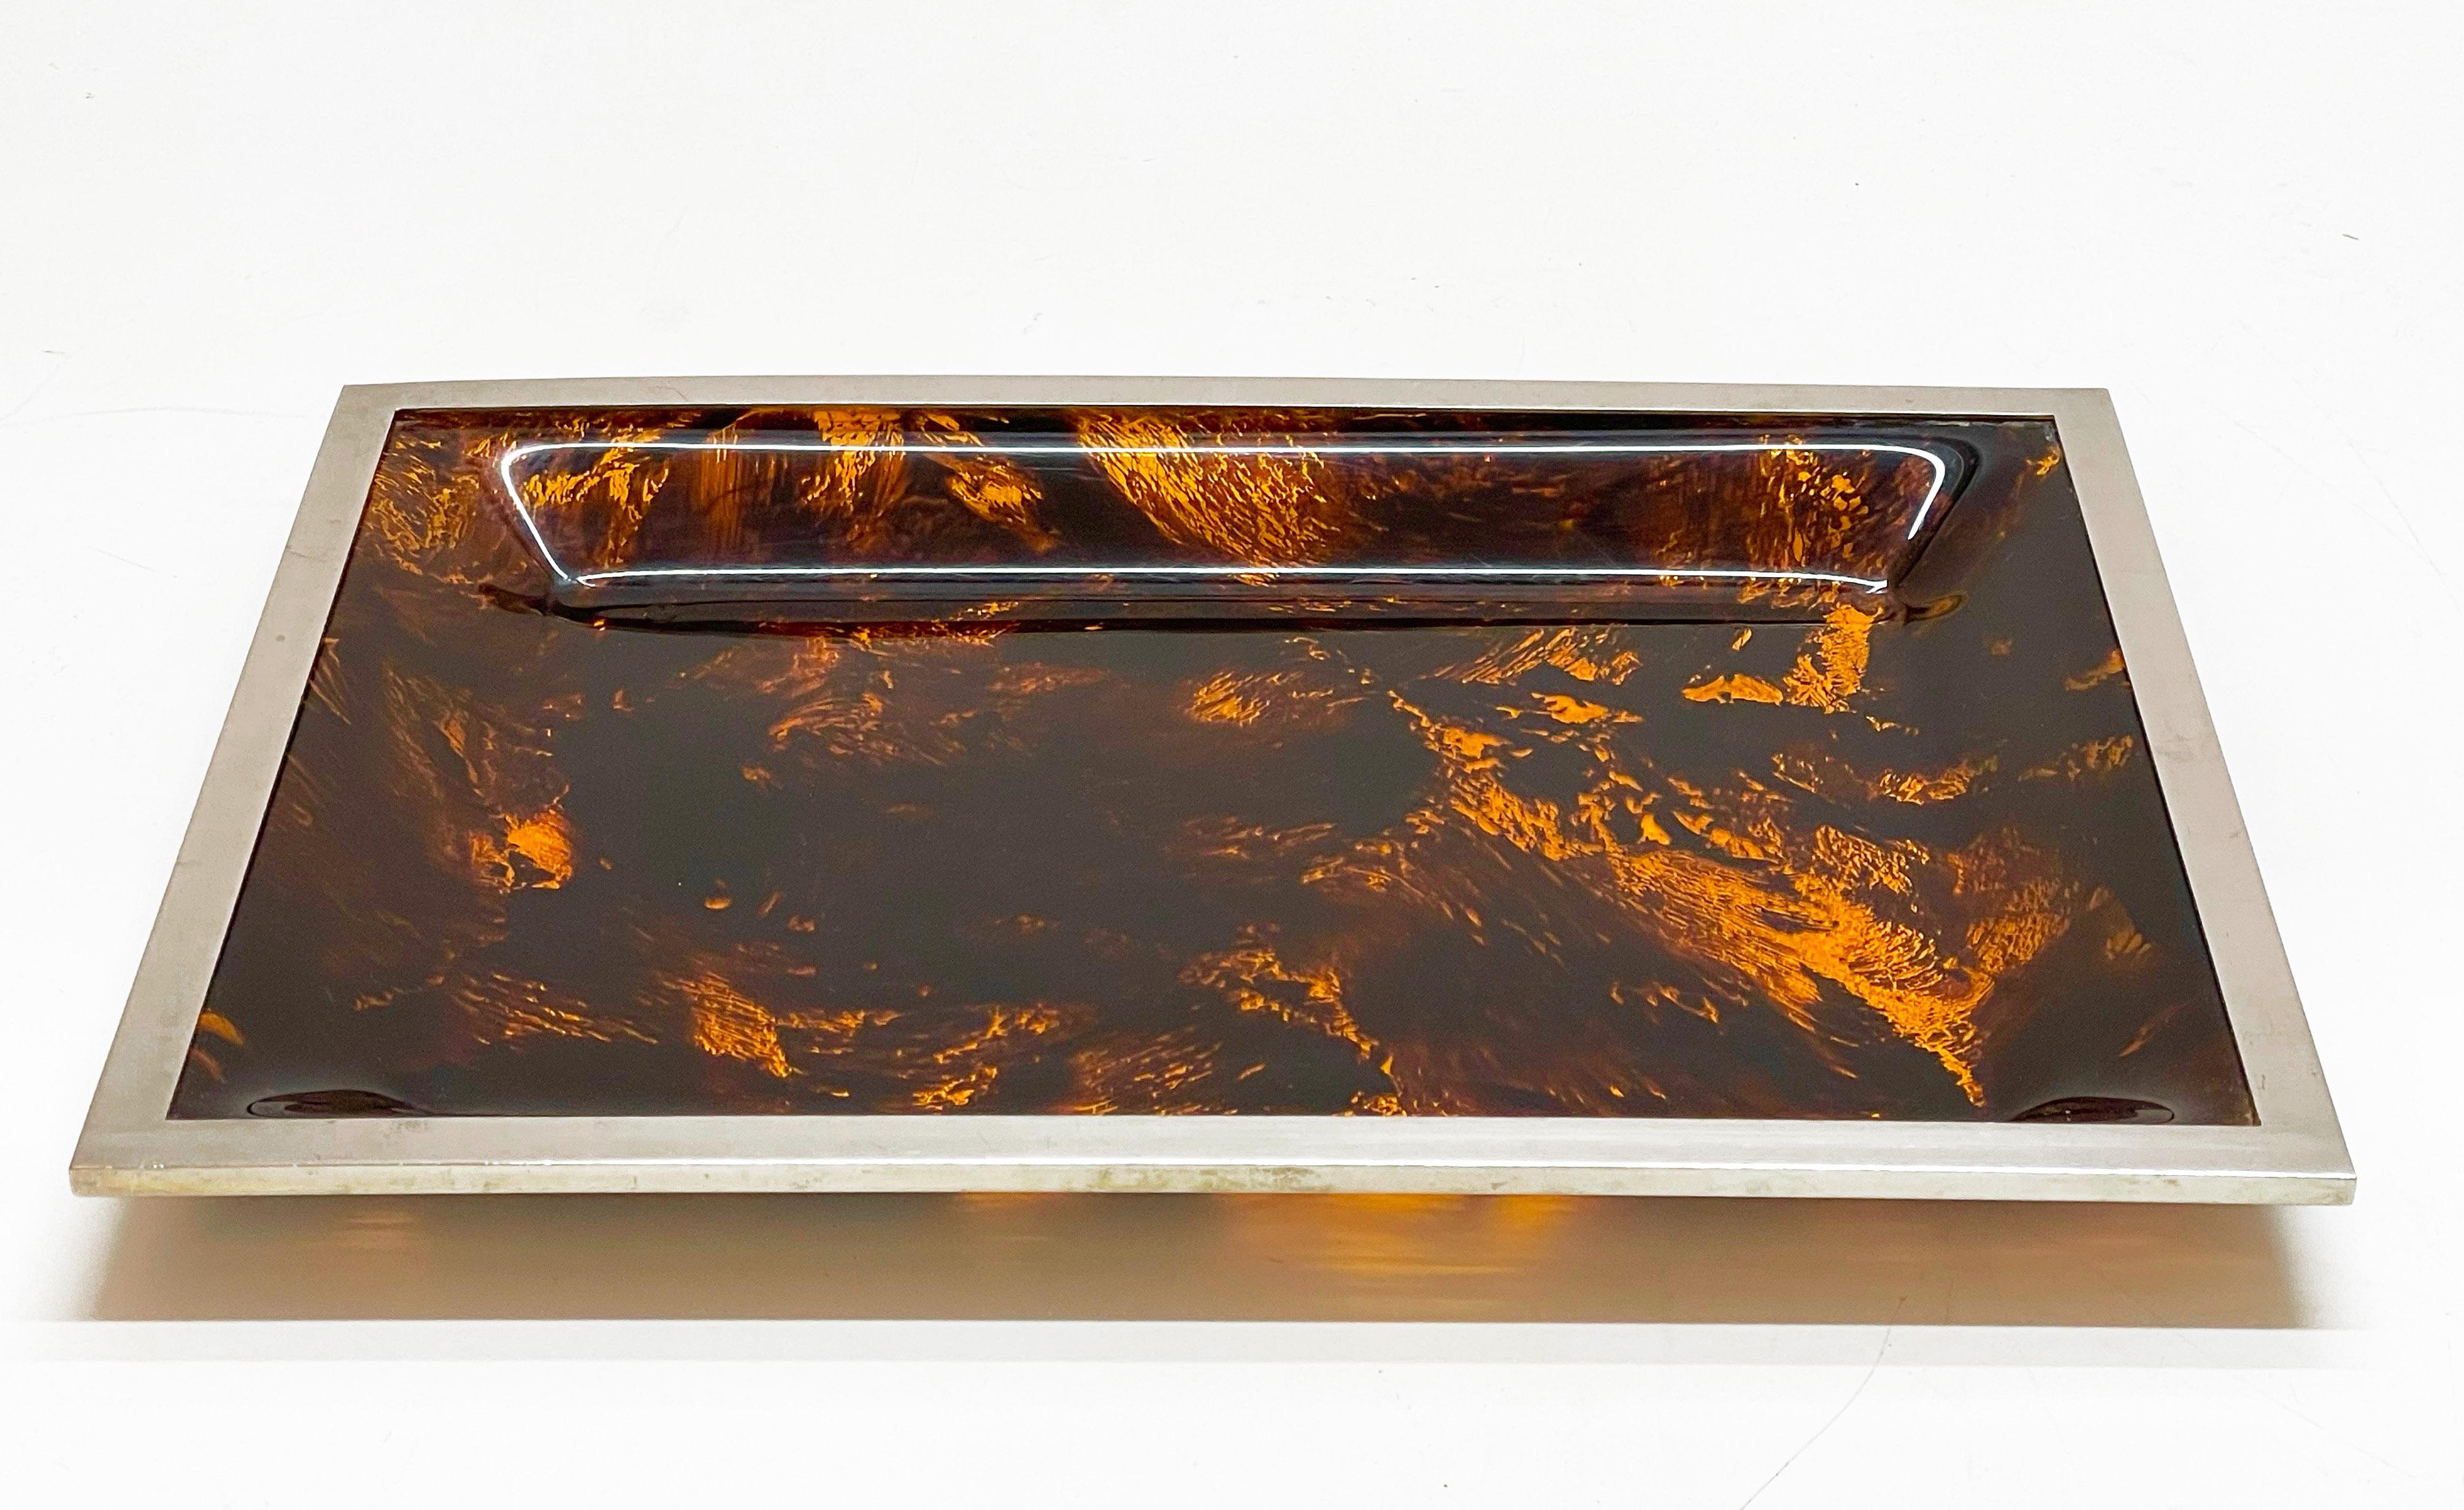 Midcentury Tortoiseshell Plexiglass Italian Serving Tray after Willy Rizzo 1970s For Sale 1